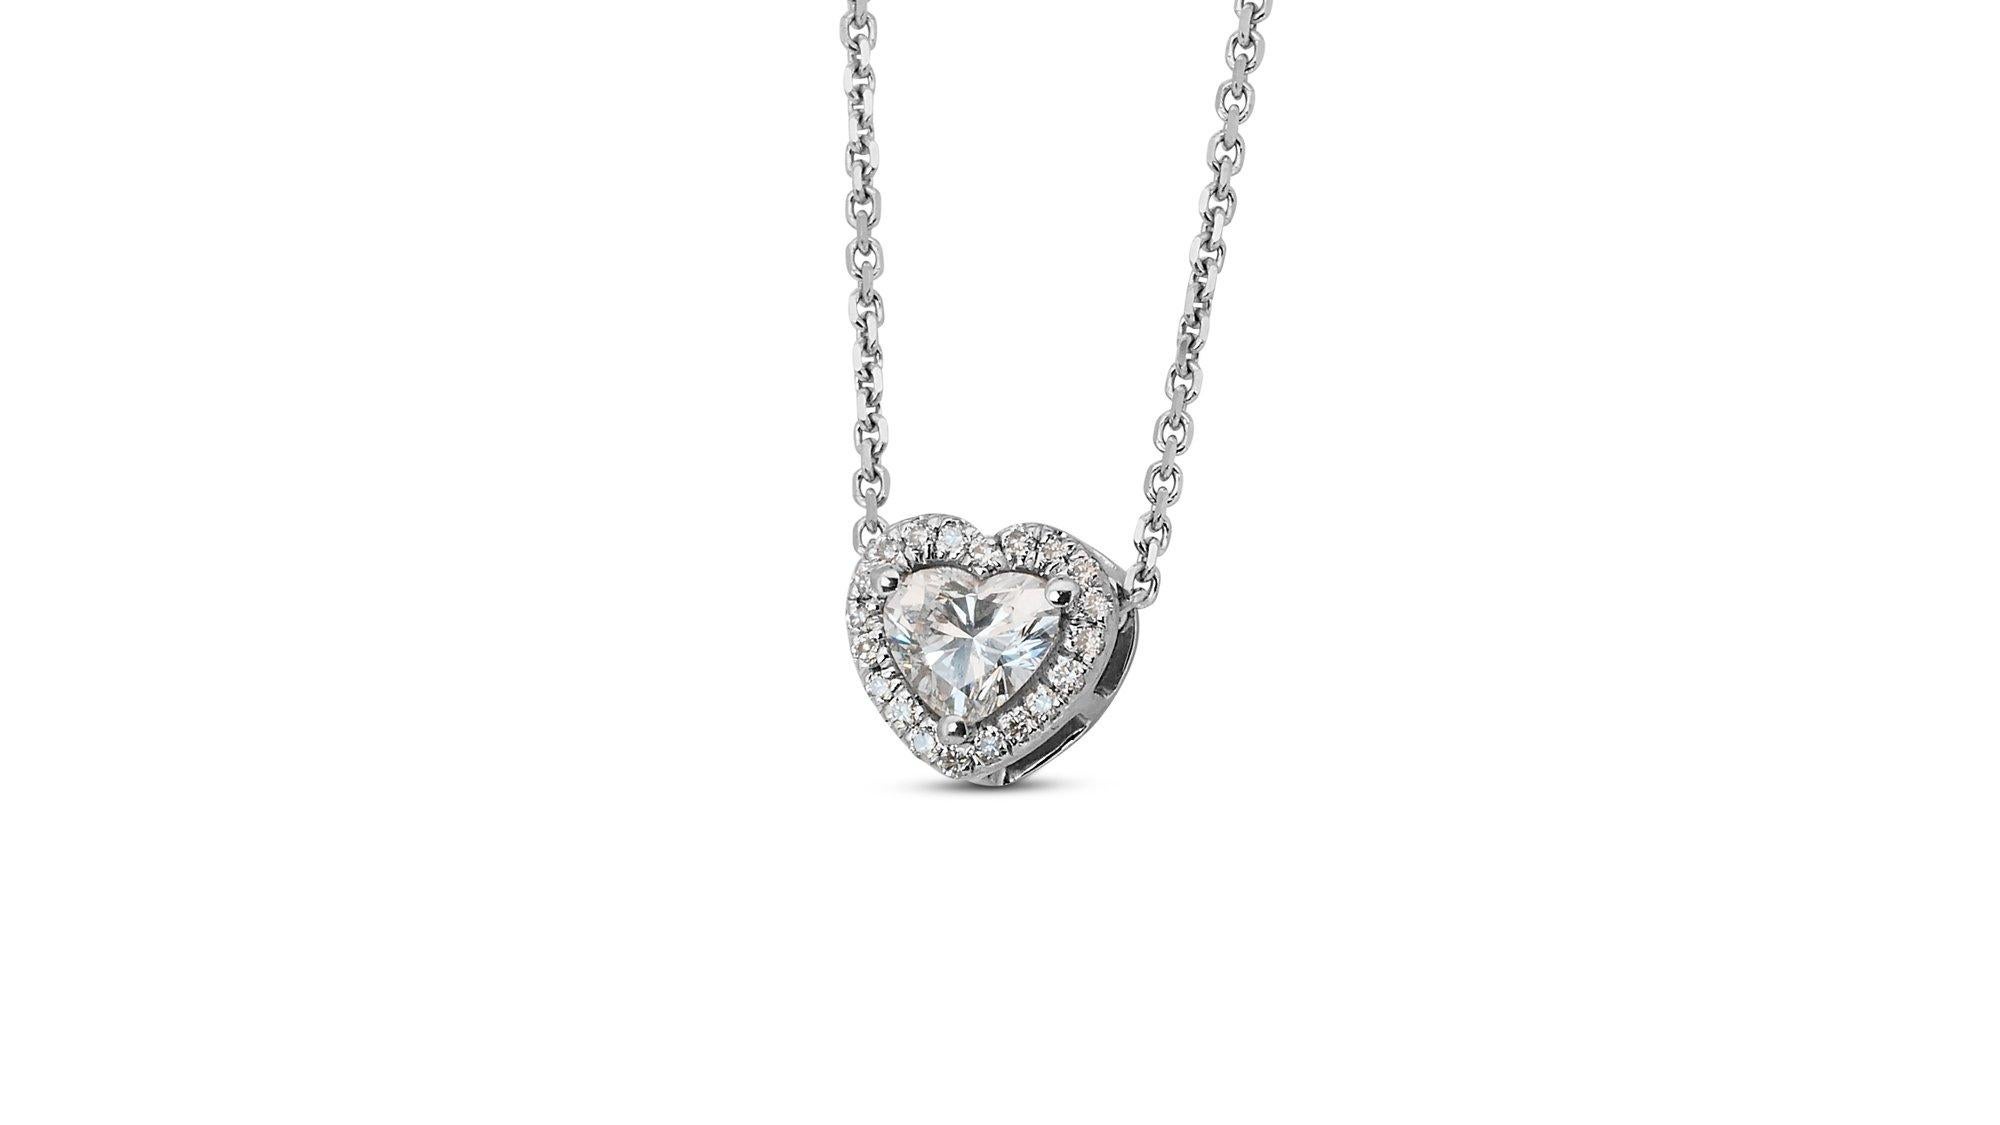 18k White Gold Heart Necklace with Pendant w/ 0.35ct Natural Diamonds GIA Cert. 1